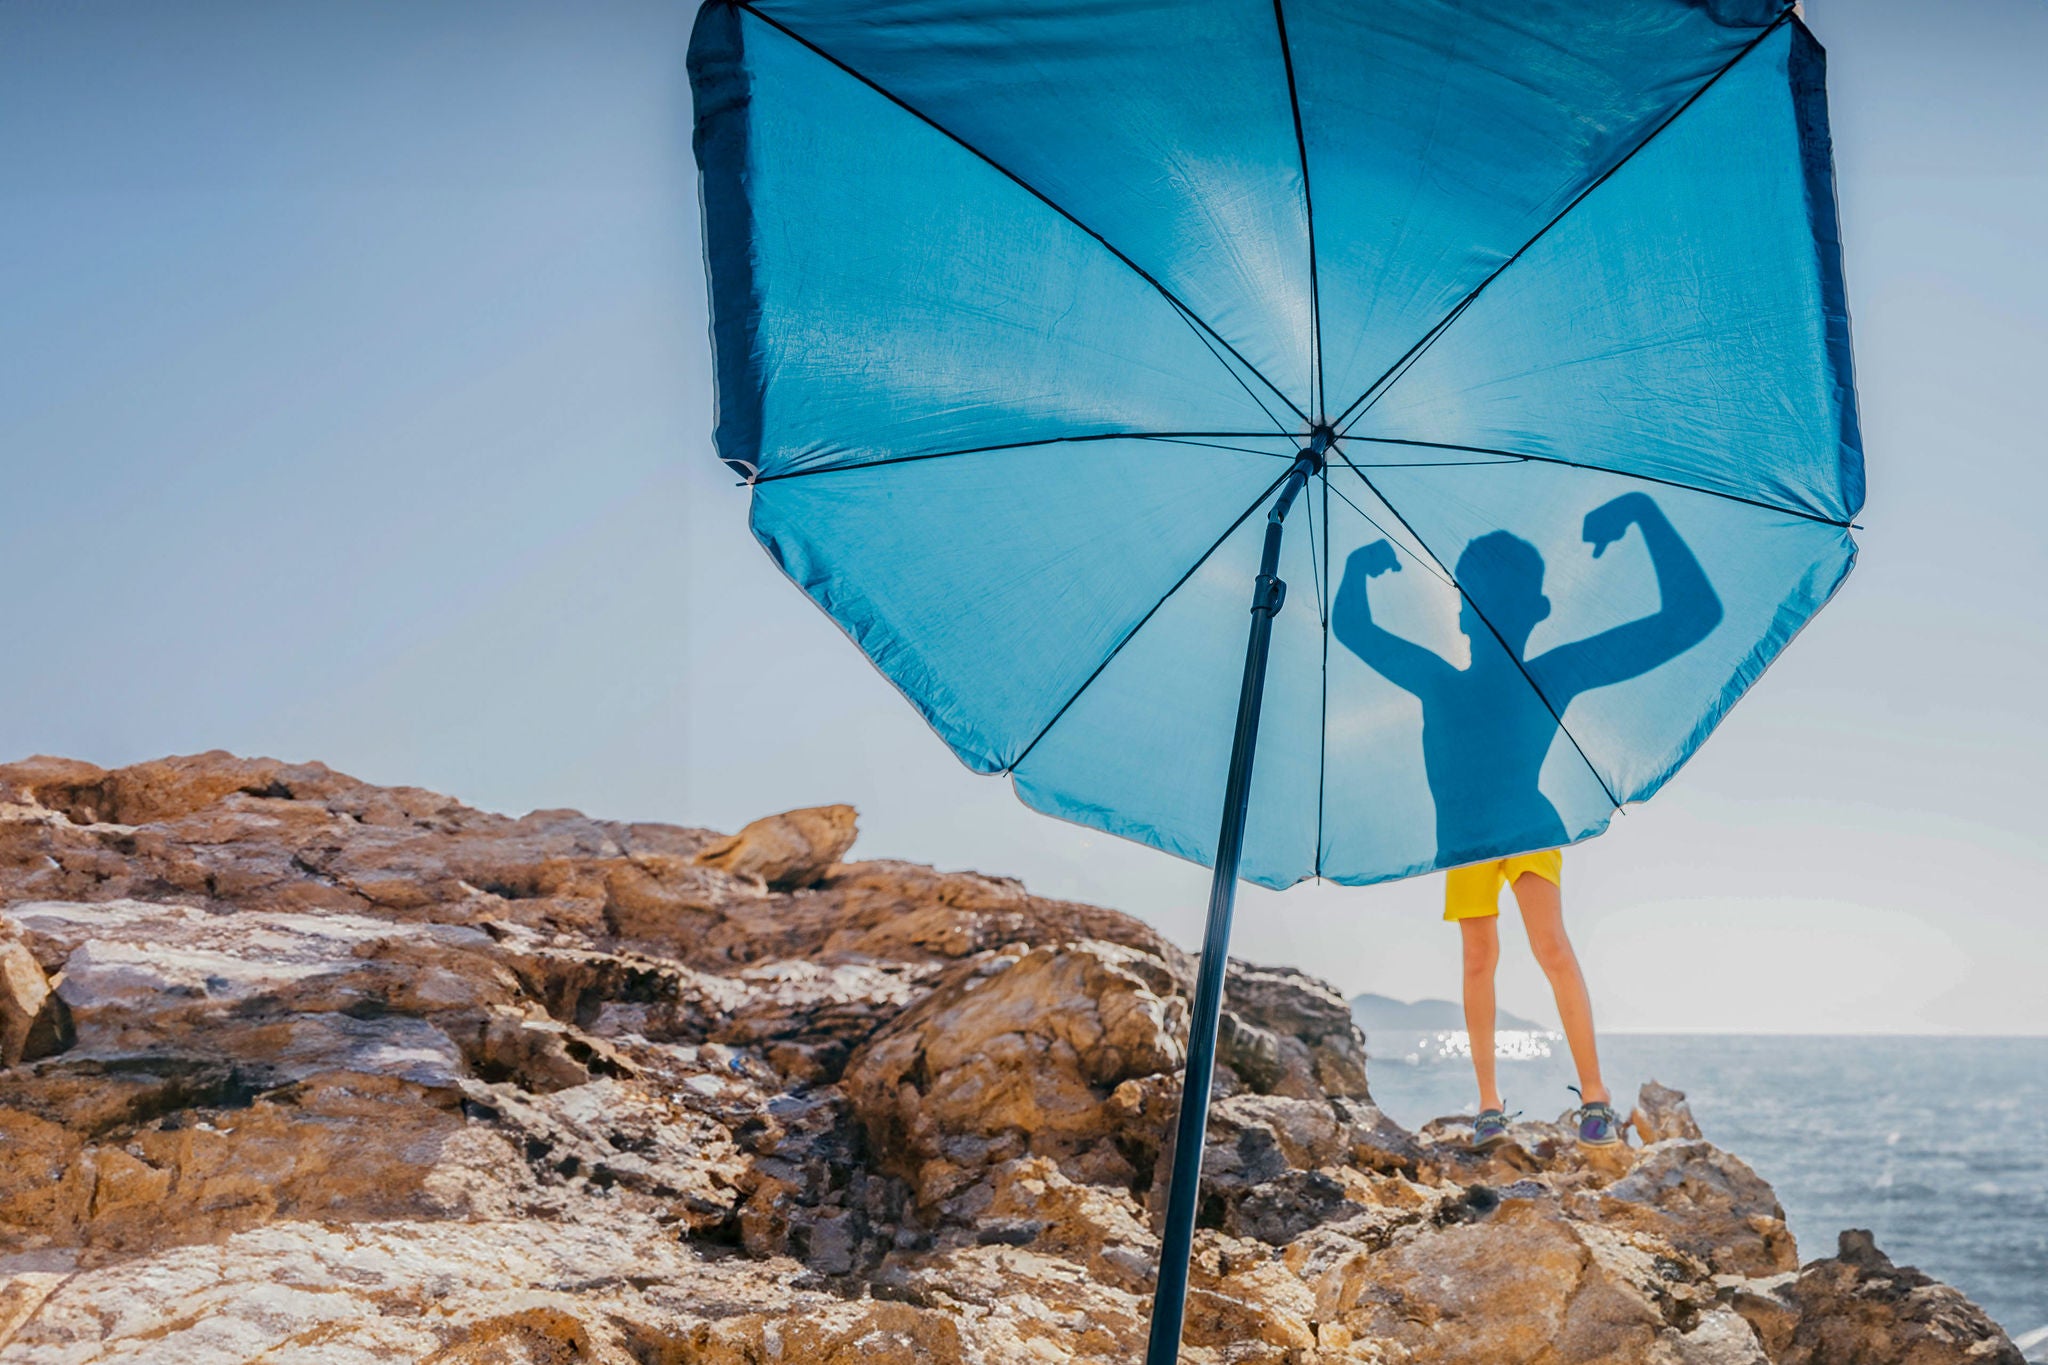 Silhouette of boy flexing his muscles on blue beach umbrella